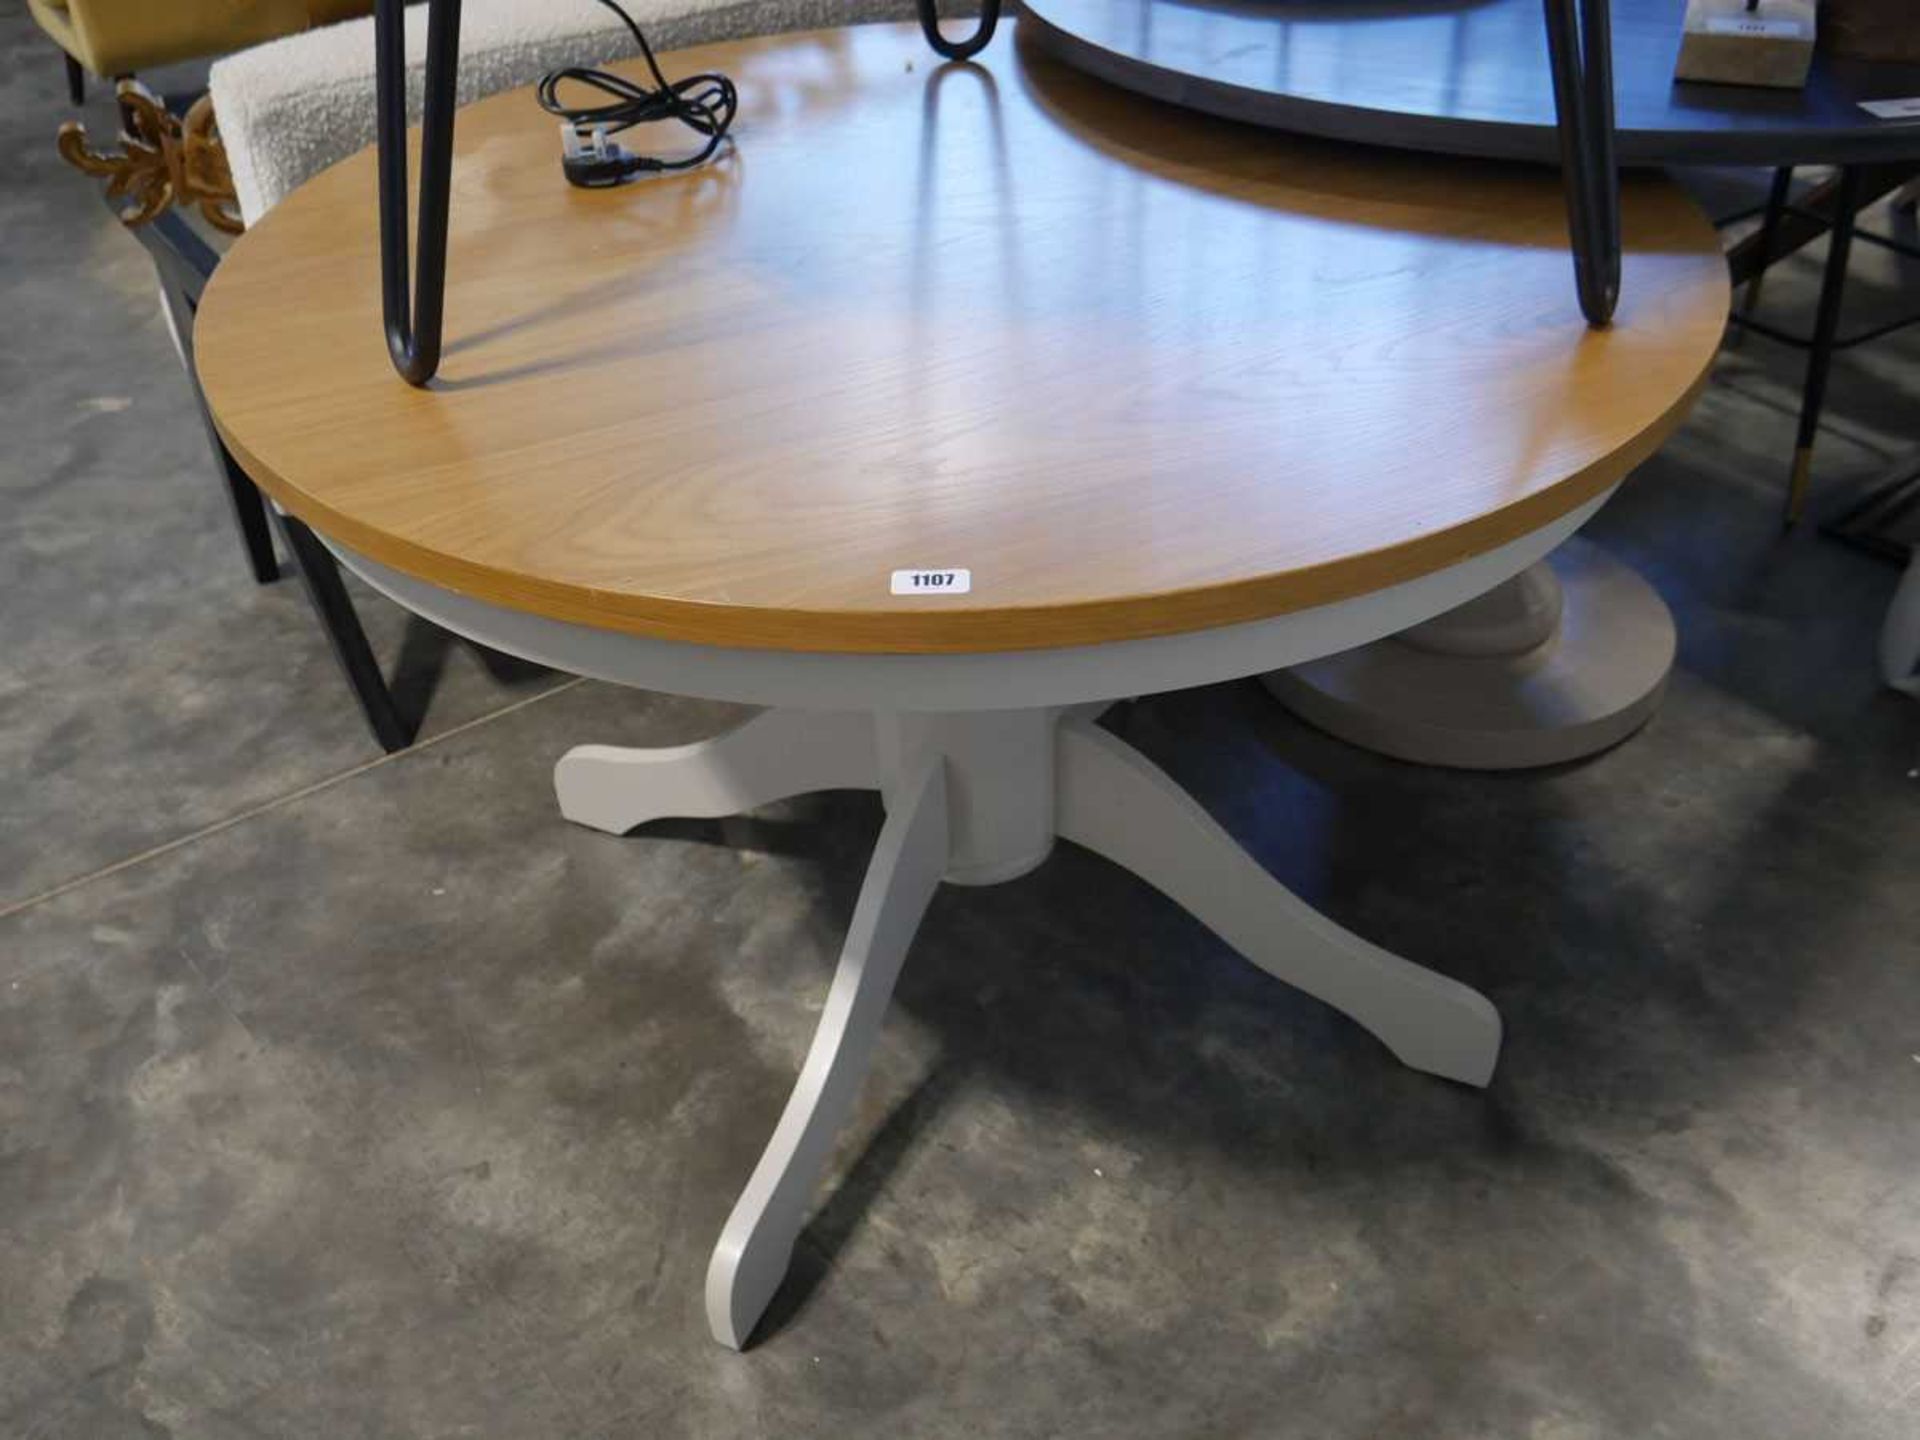 White single pedestal dining table with circular light oak surface